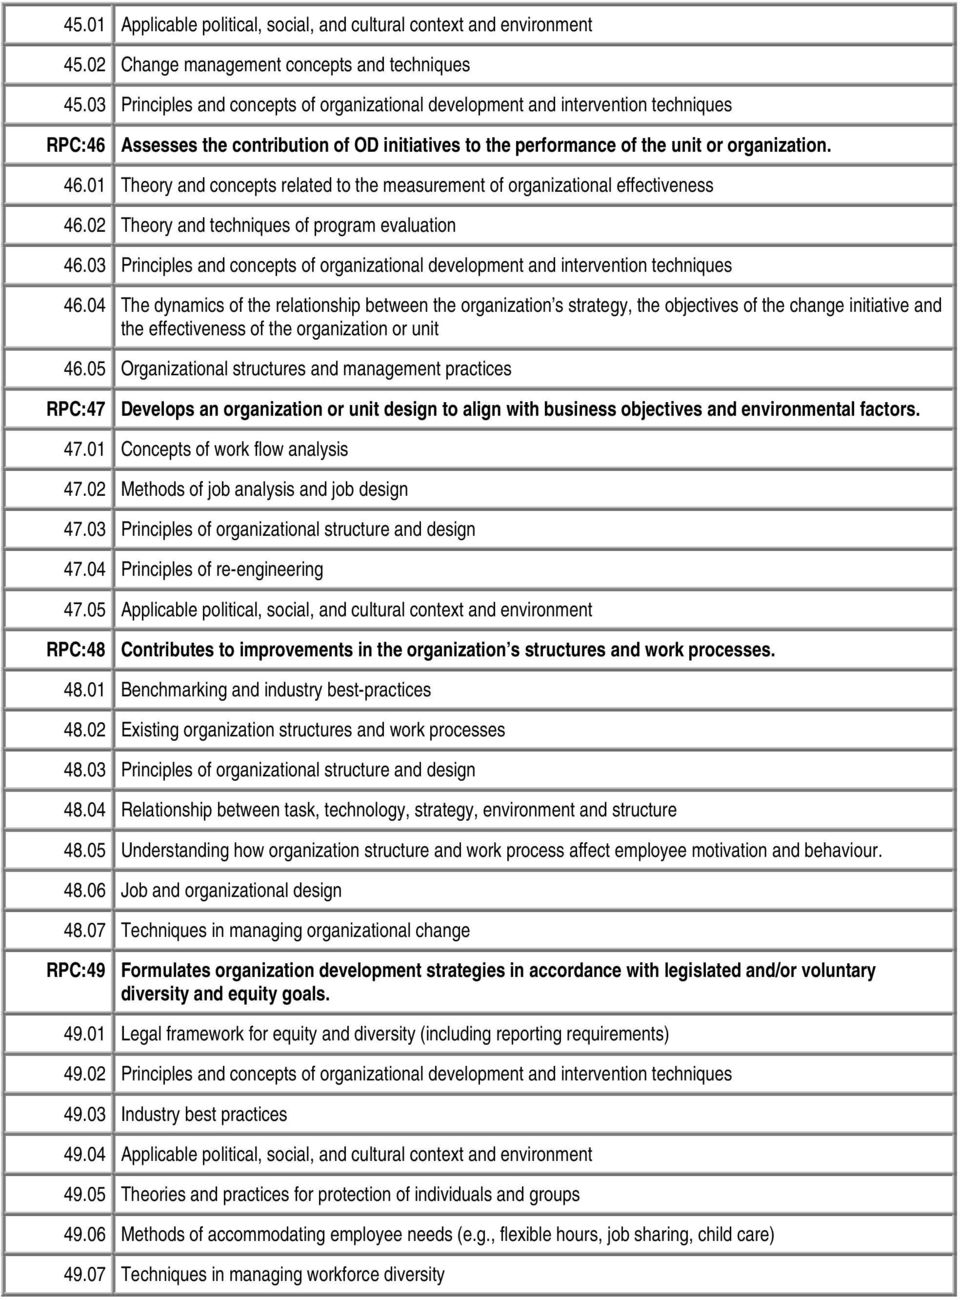 01 Theory and concepts related to the measurement of organizational effectiveness 46.02 Theory and techniques of program evaluation 46.